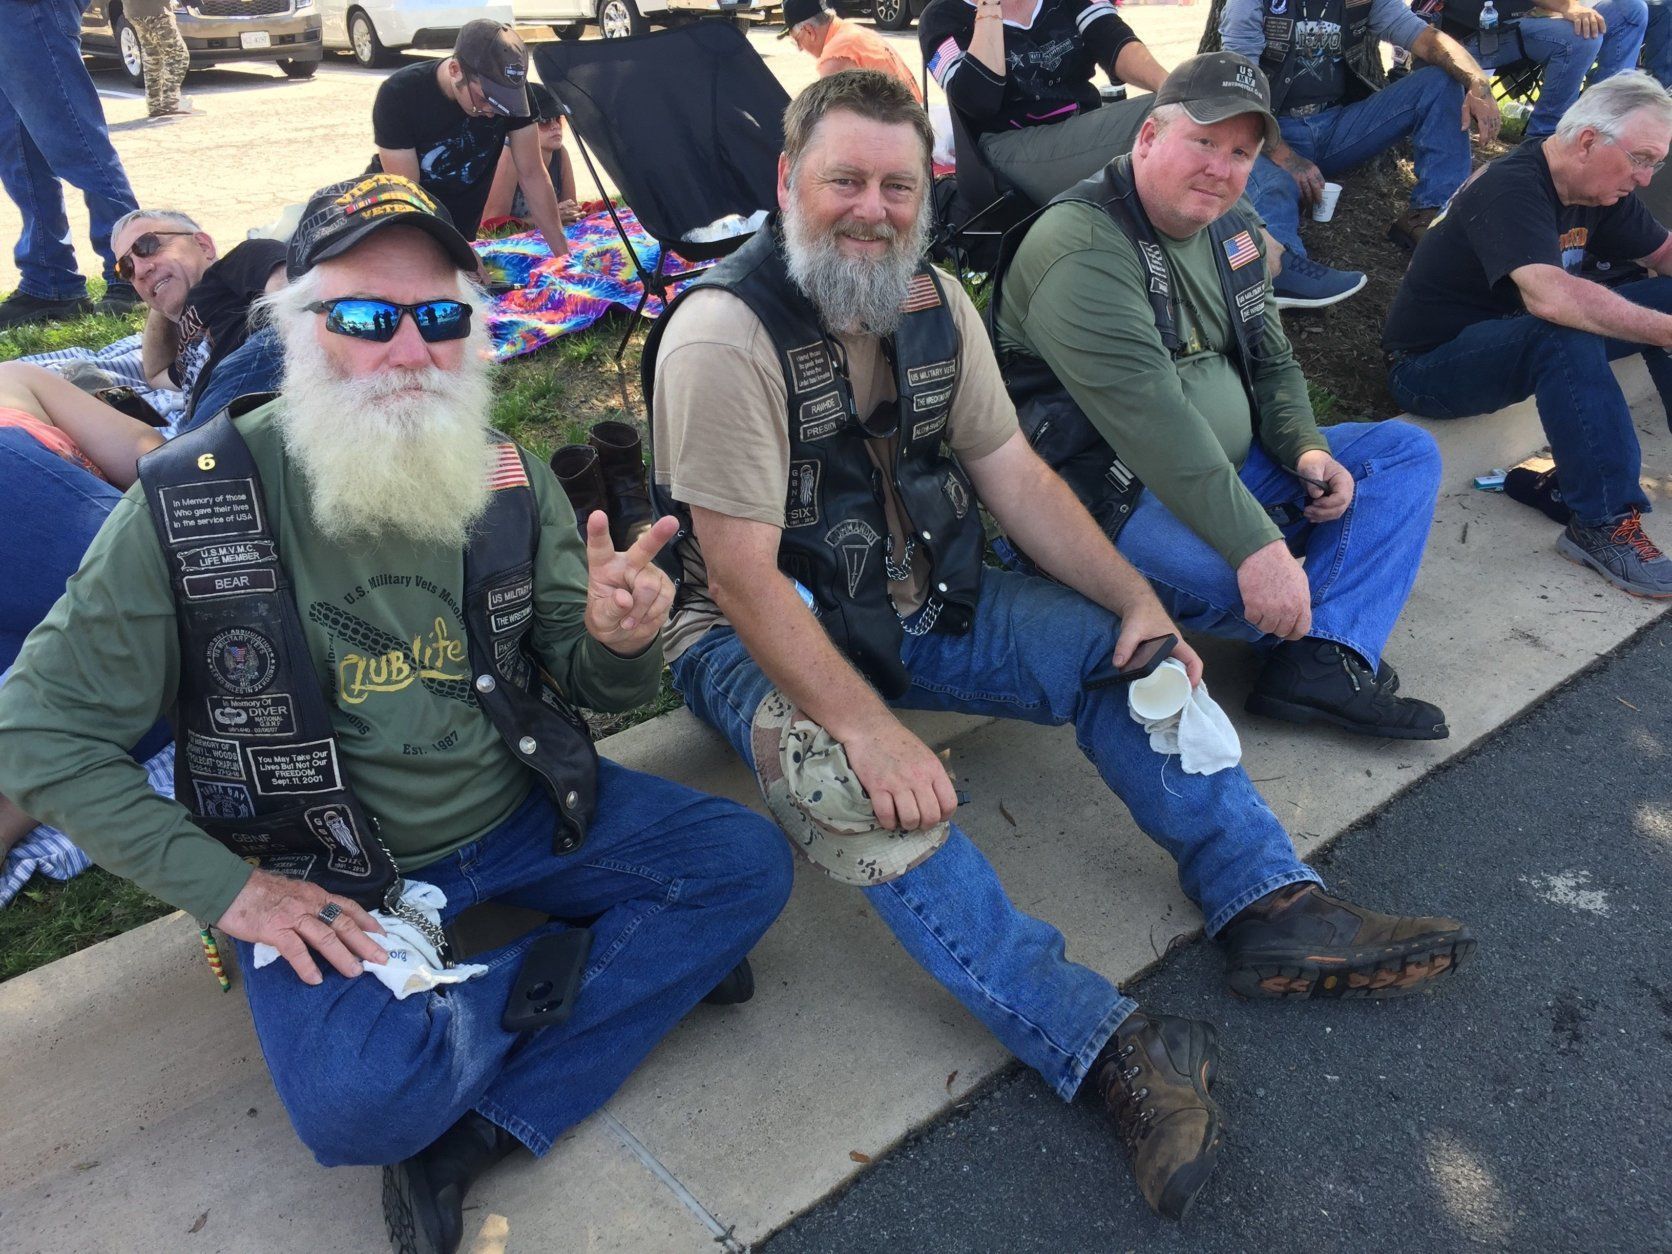 Bikers take a break from the 2019 Rolling Thunder ride. (WFED/Tom Temin)